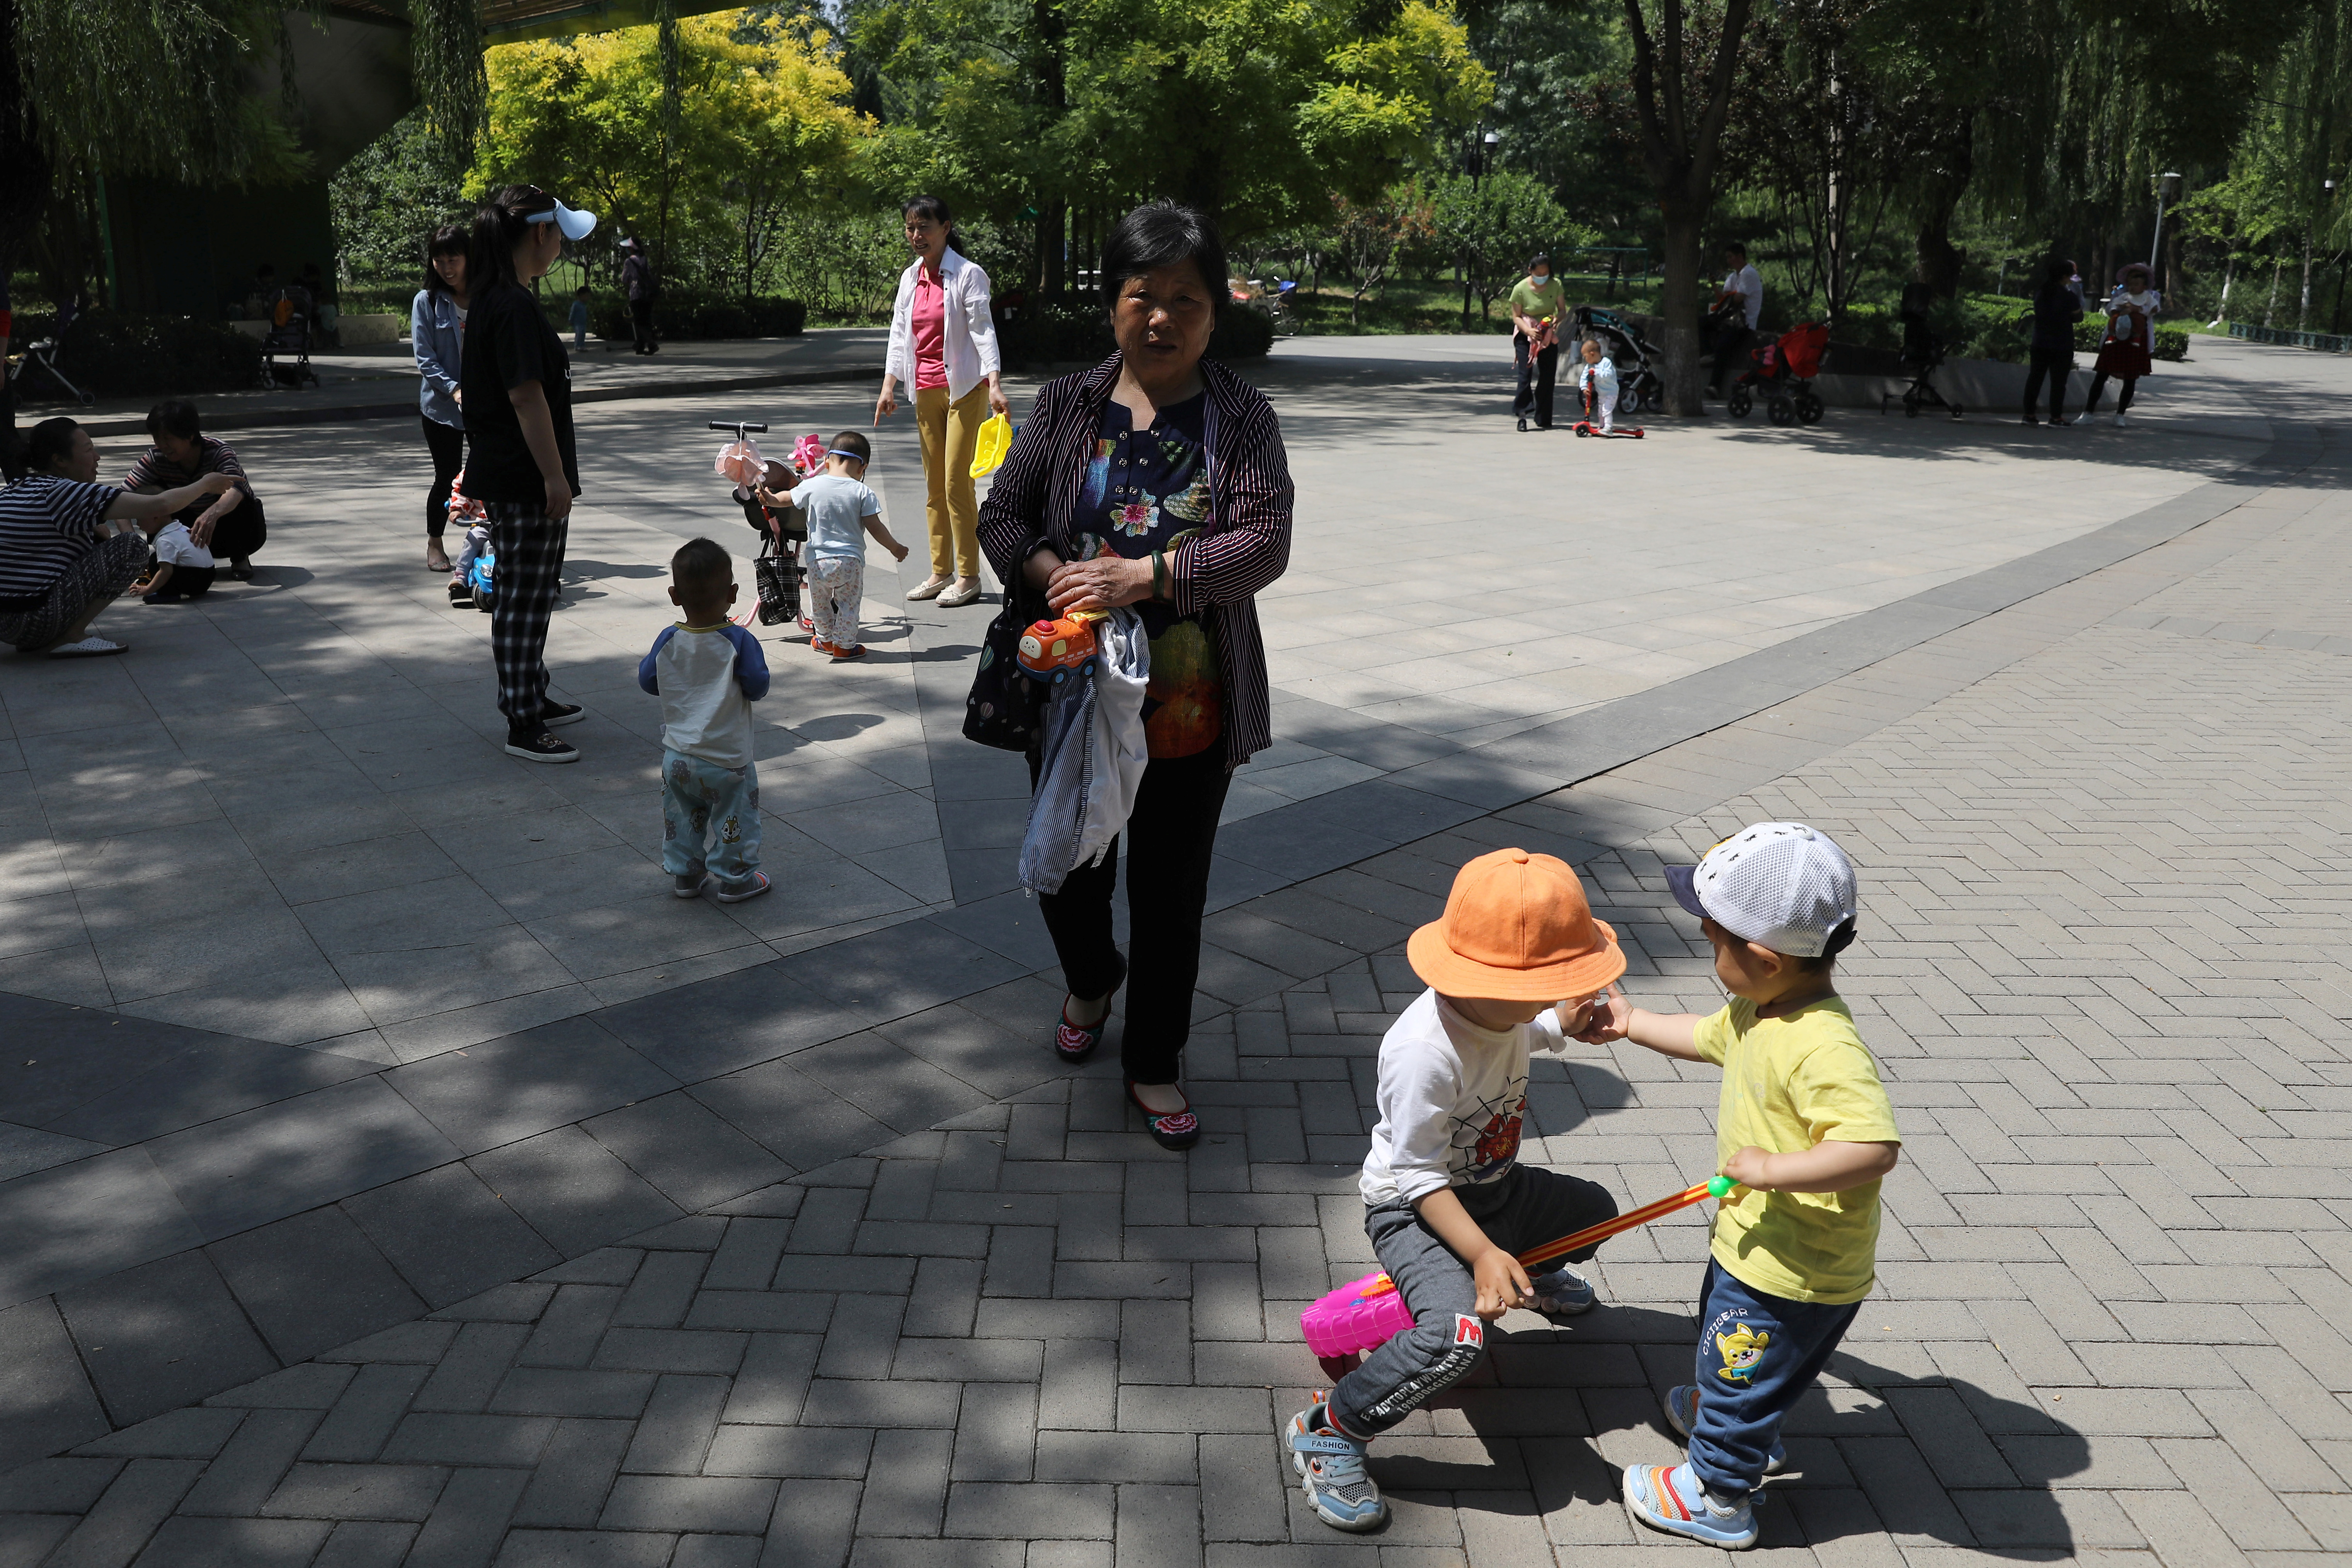 Children play next to adults at a park in Beijing